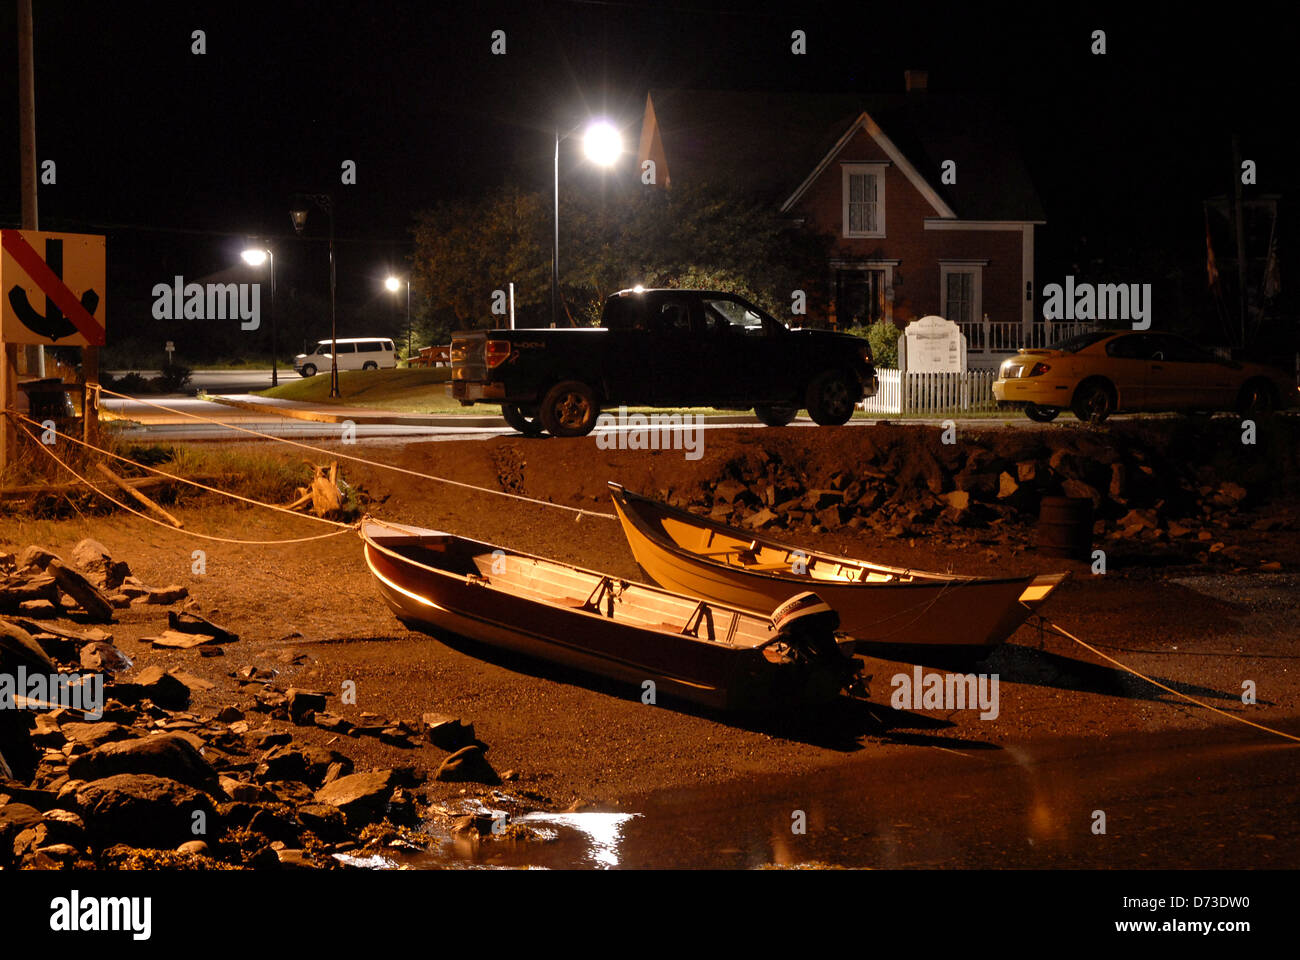 The harbour, Woody Point, Newfoundland, at night Stock Photo